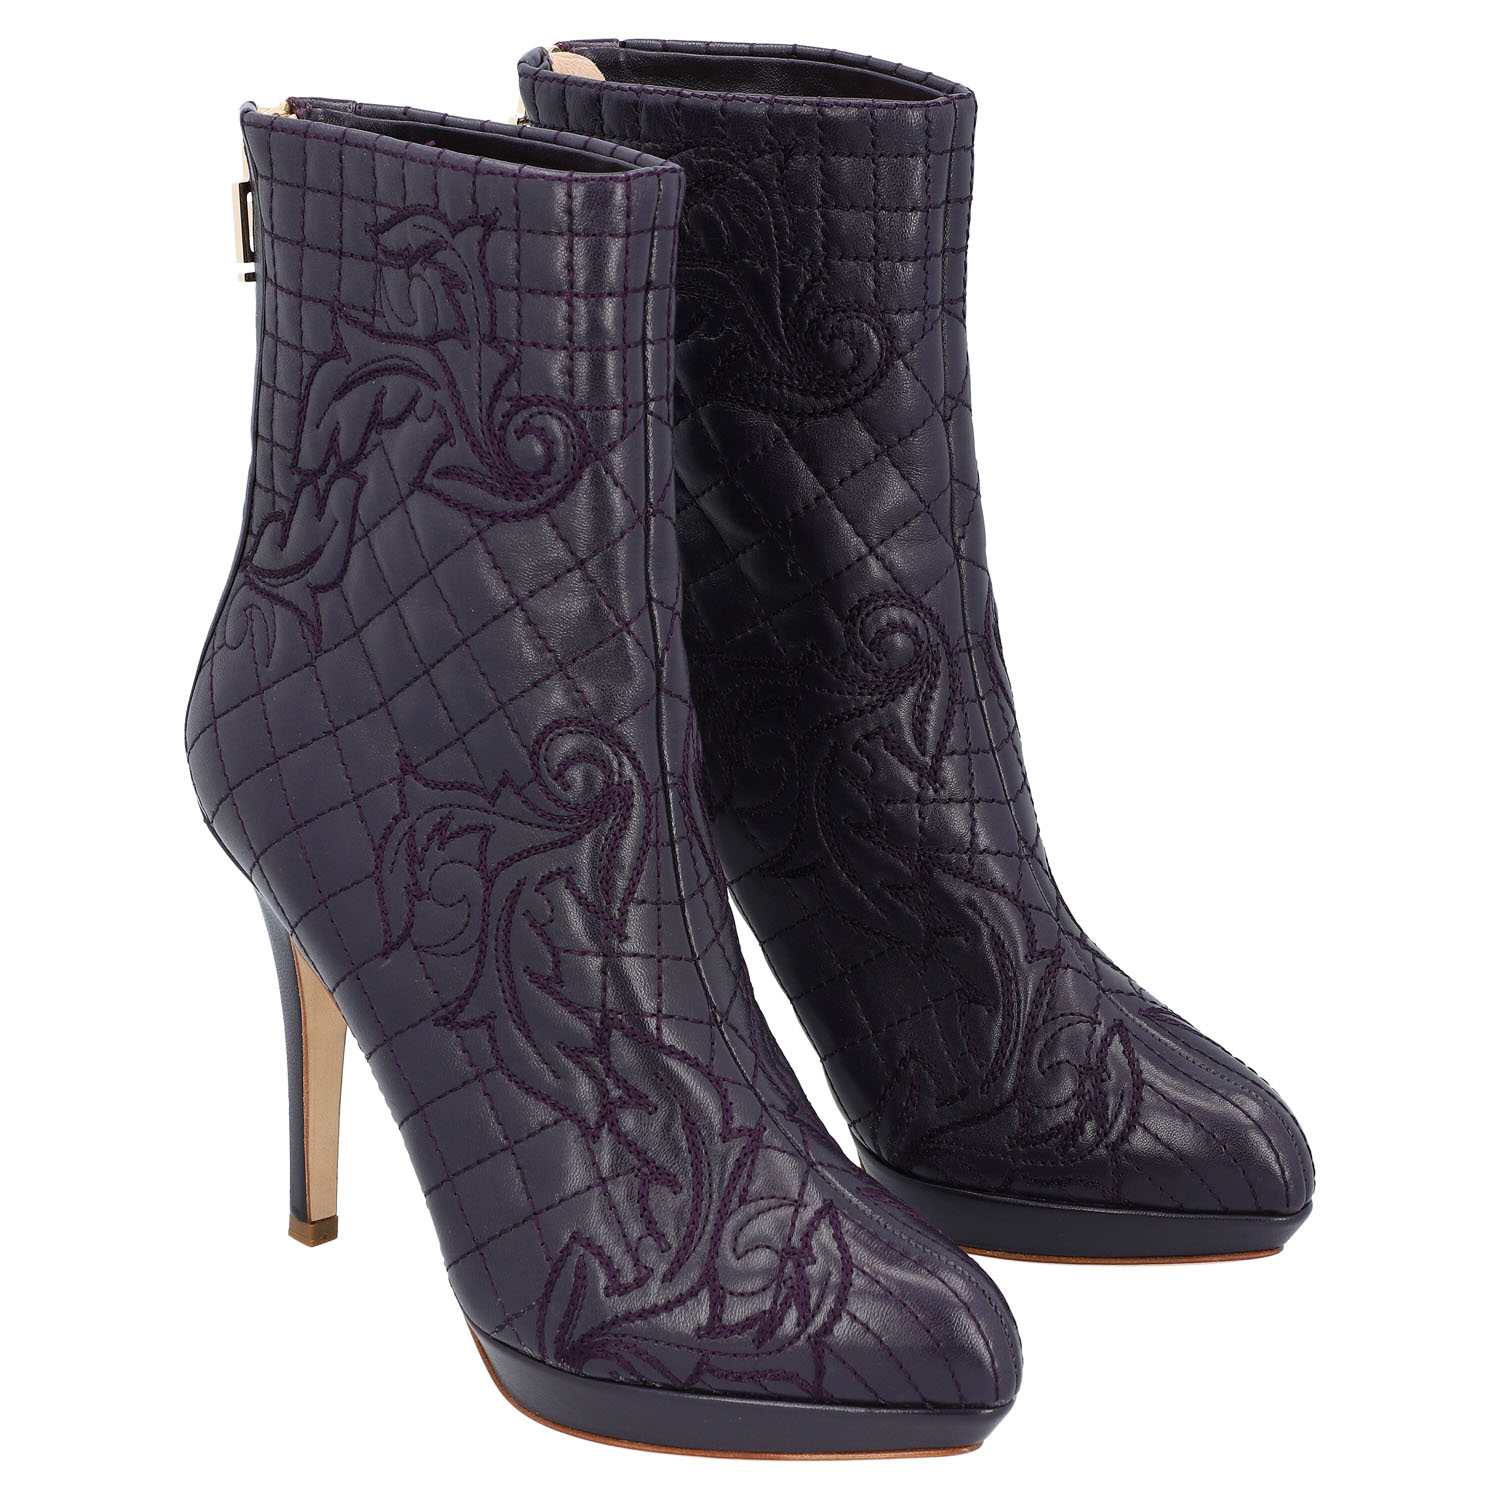 EPPLI, VERSACE ankle boots, size 39.5.